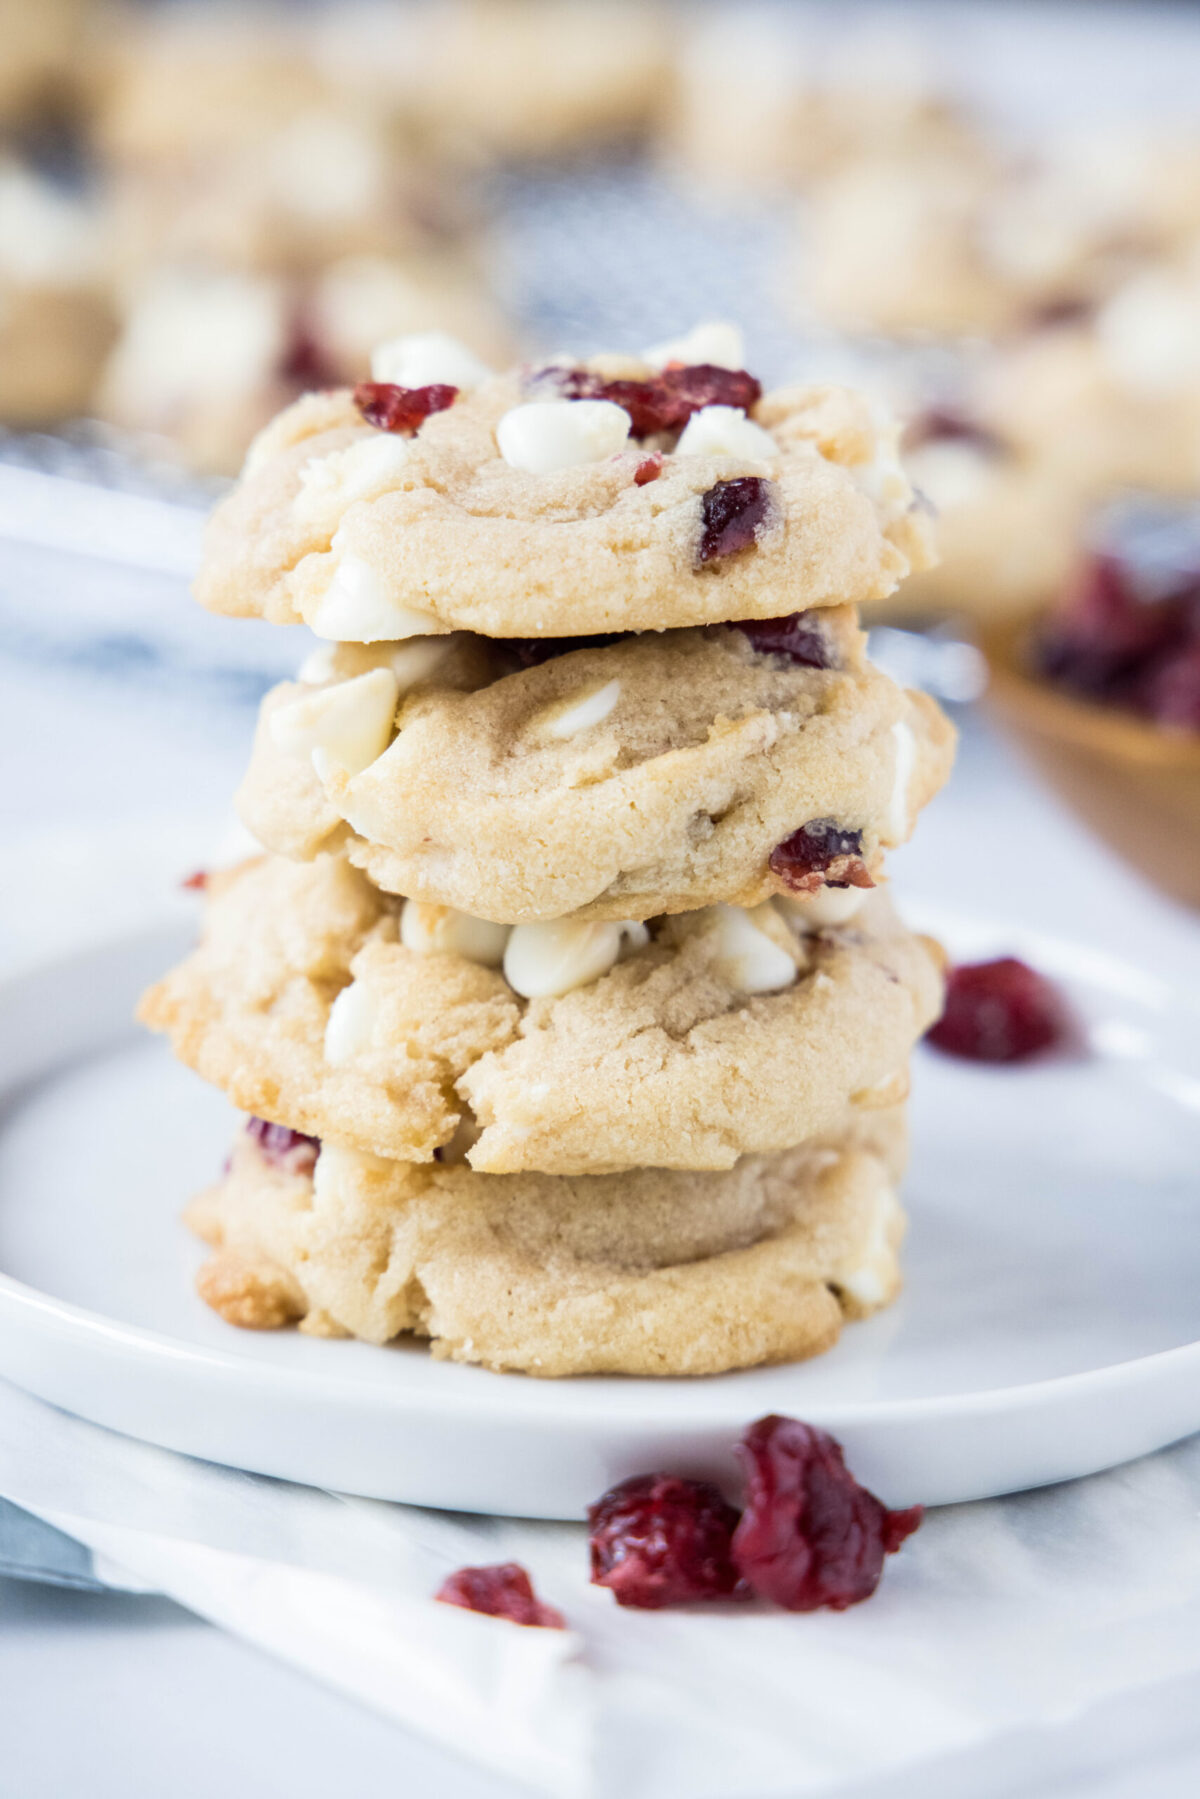 A stack of four white chocolate cranberry cookies on a plate, surrounded by dried cranberries